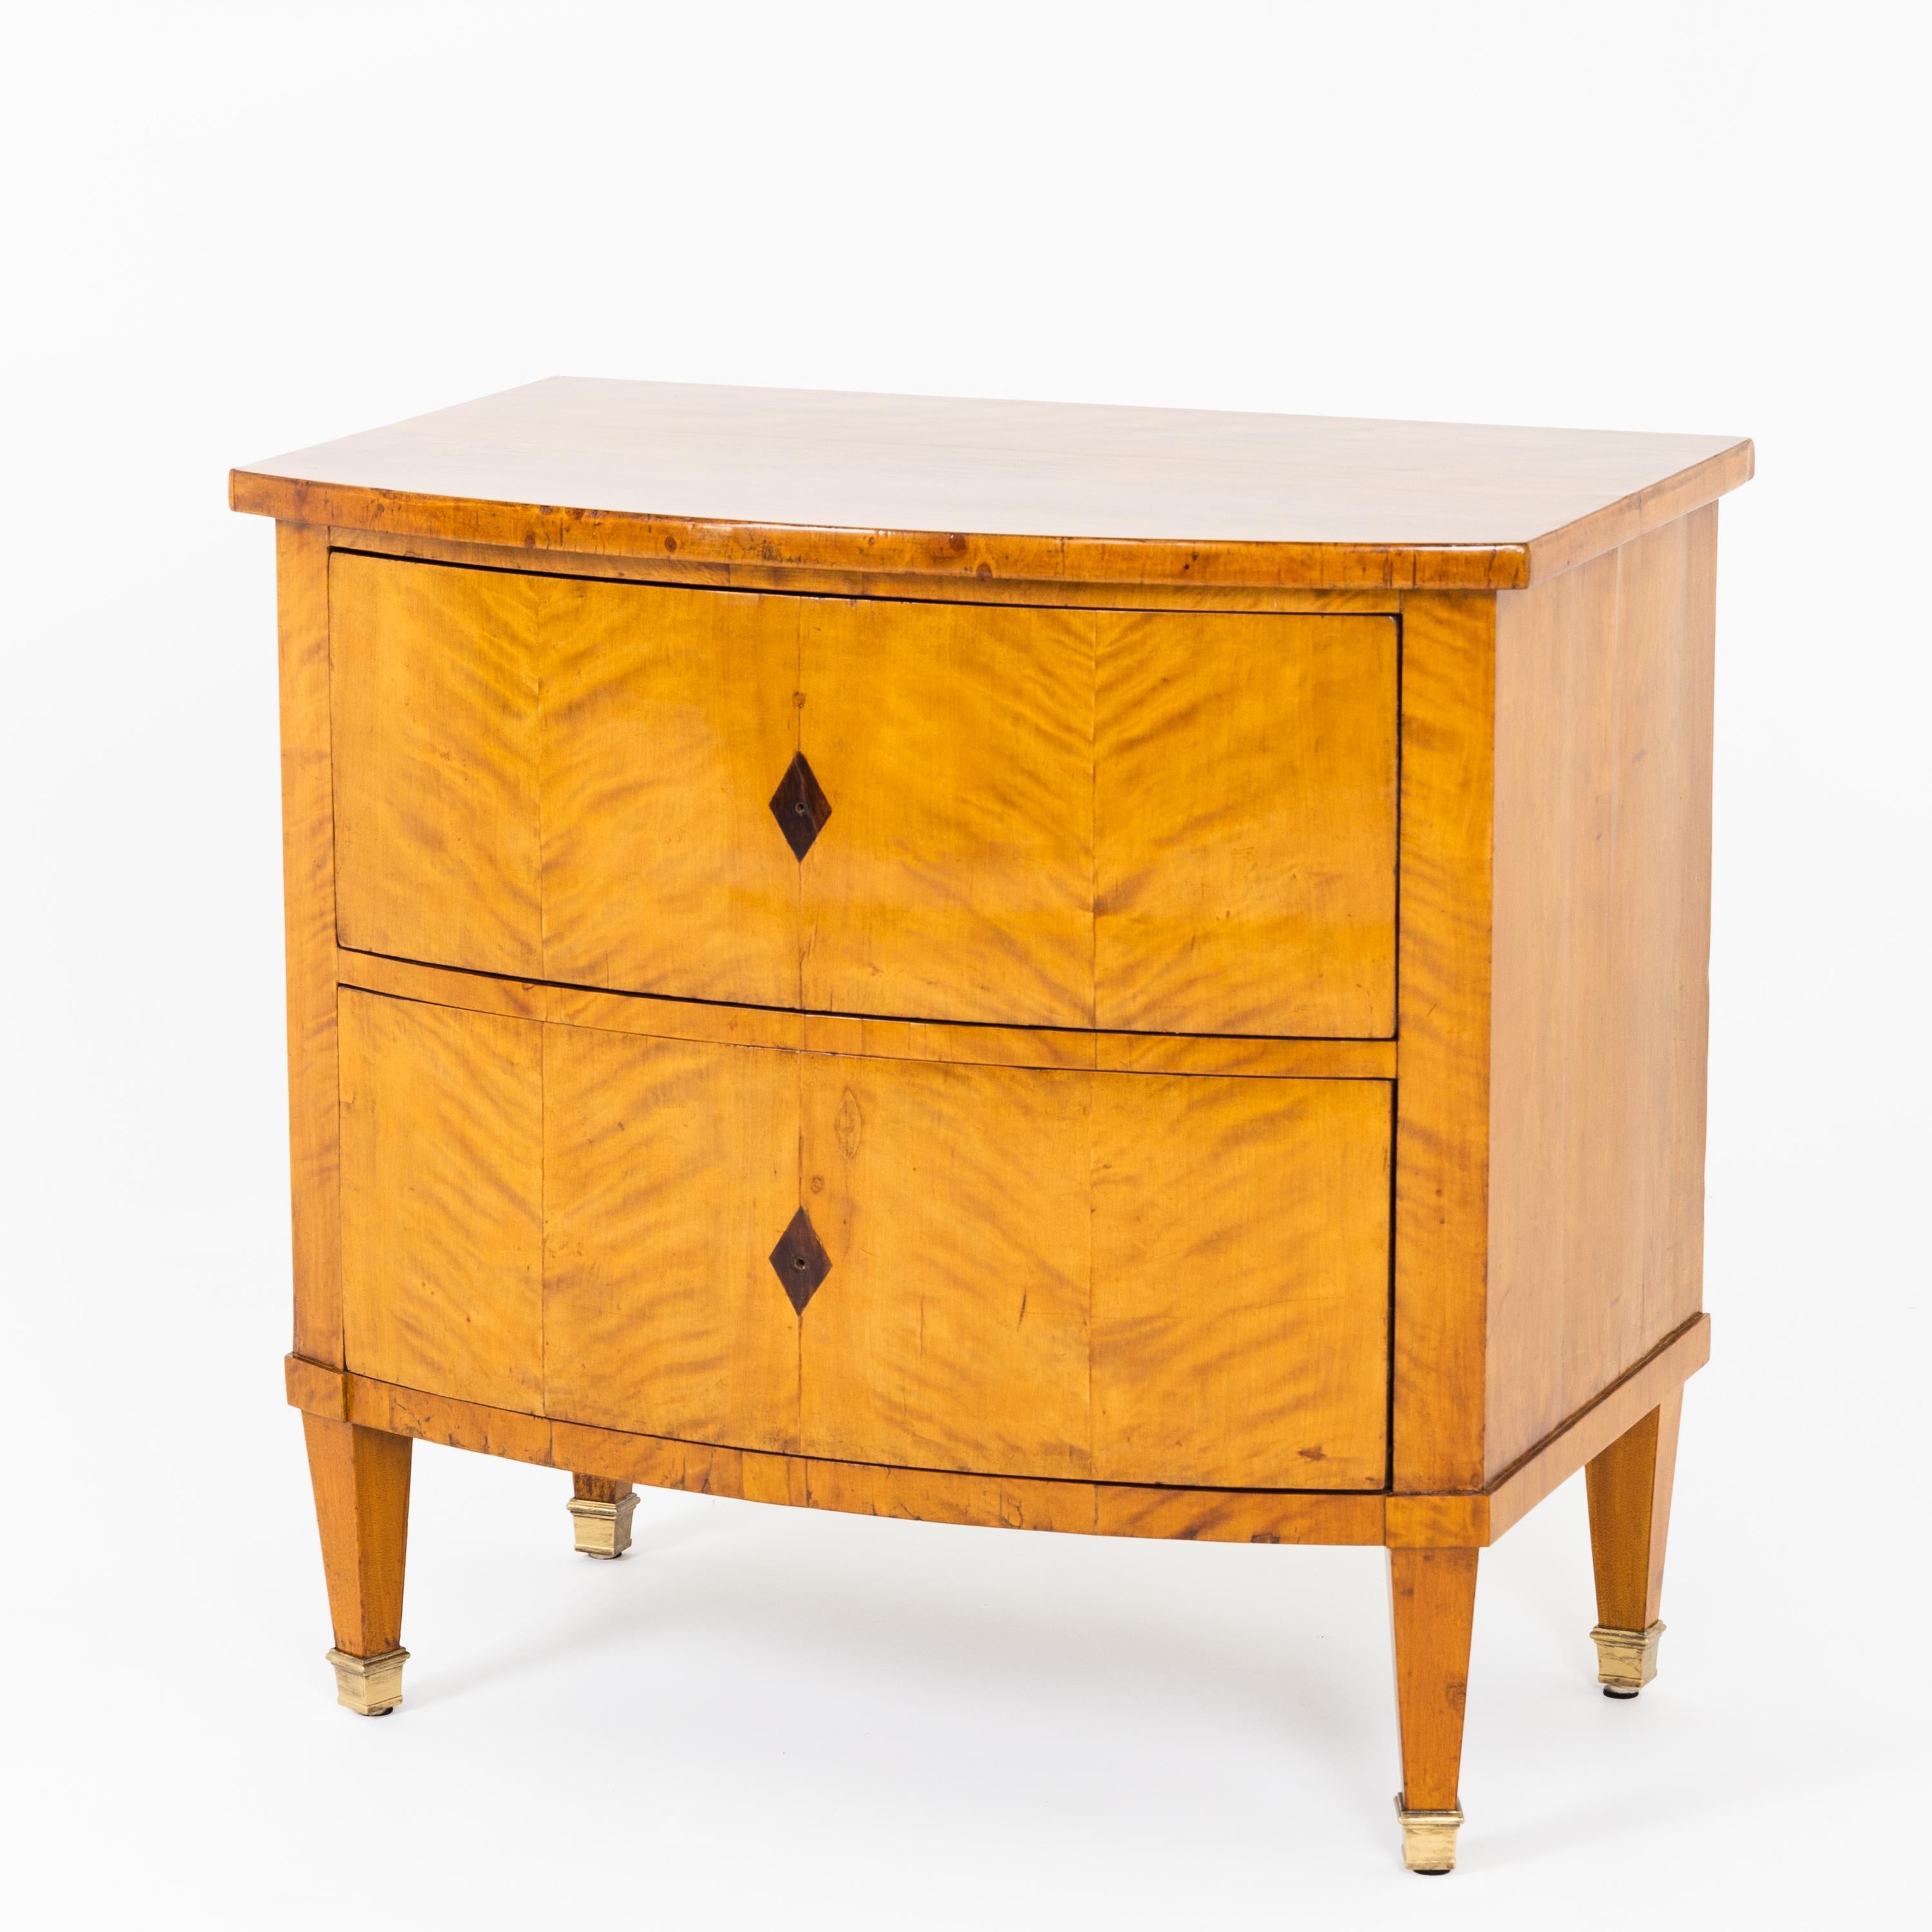 A Biedermeier chest of drawers standing on square tapering feet with brass sabots, with a bow front and two drawers with diamond-shaped inlays. The corpus is veneered in birch.
  